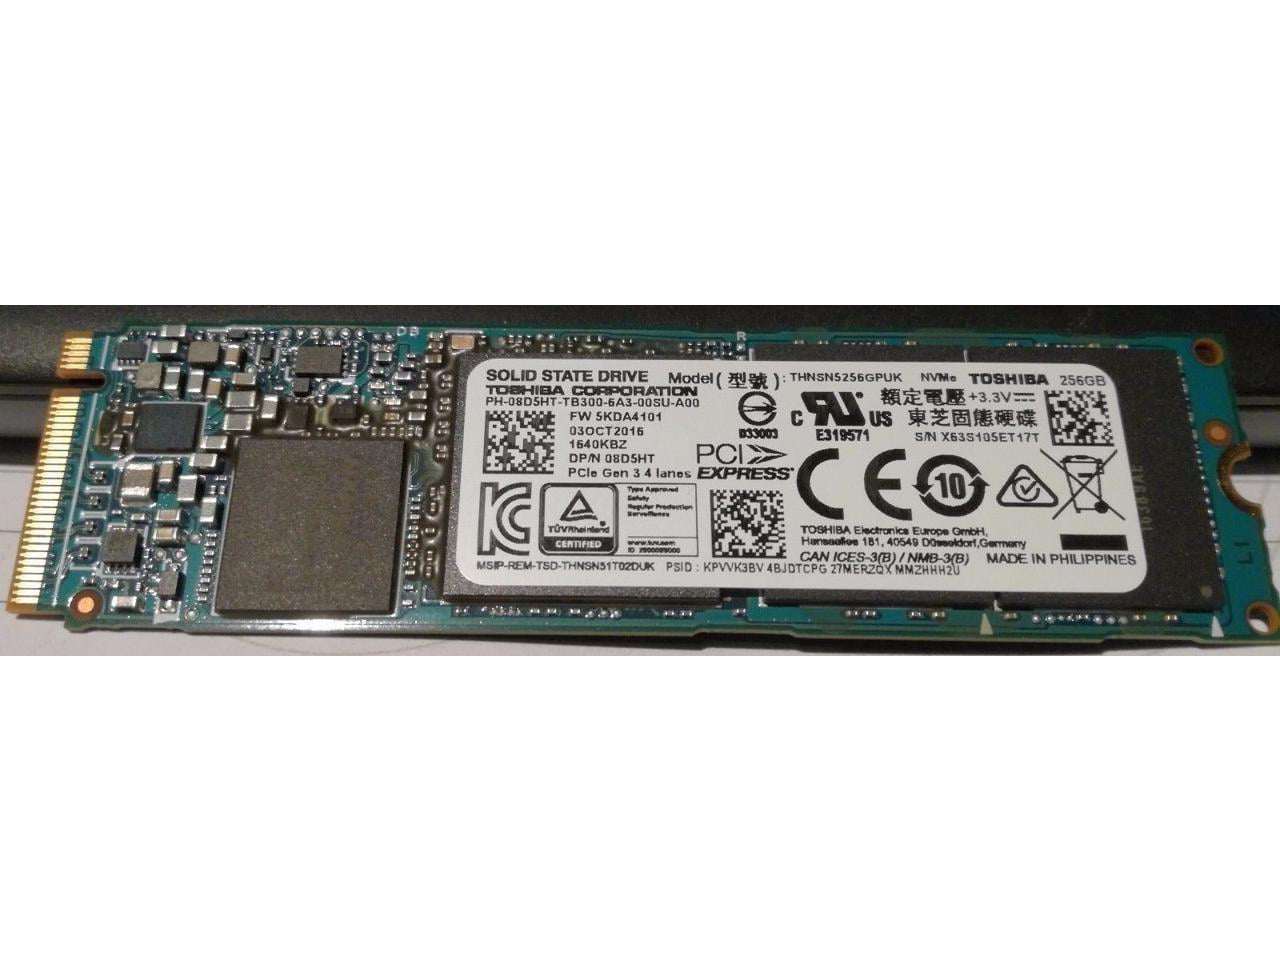 NEW DELL 8D5HT Toshiba THNSN5256GPUK 256GB M.2 2280 SSD NVMe PCIe 